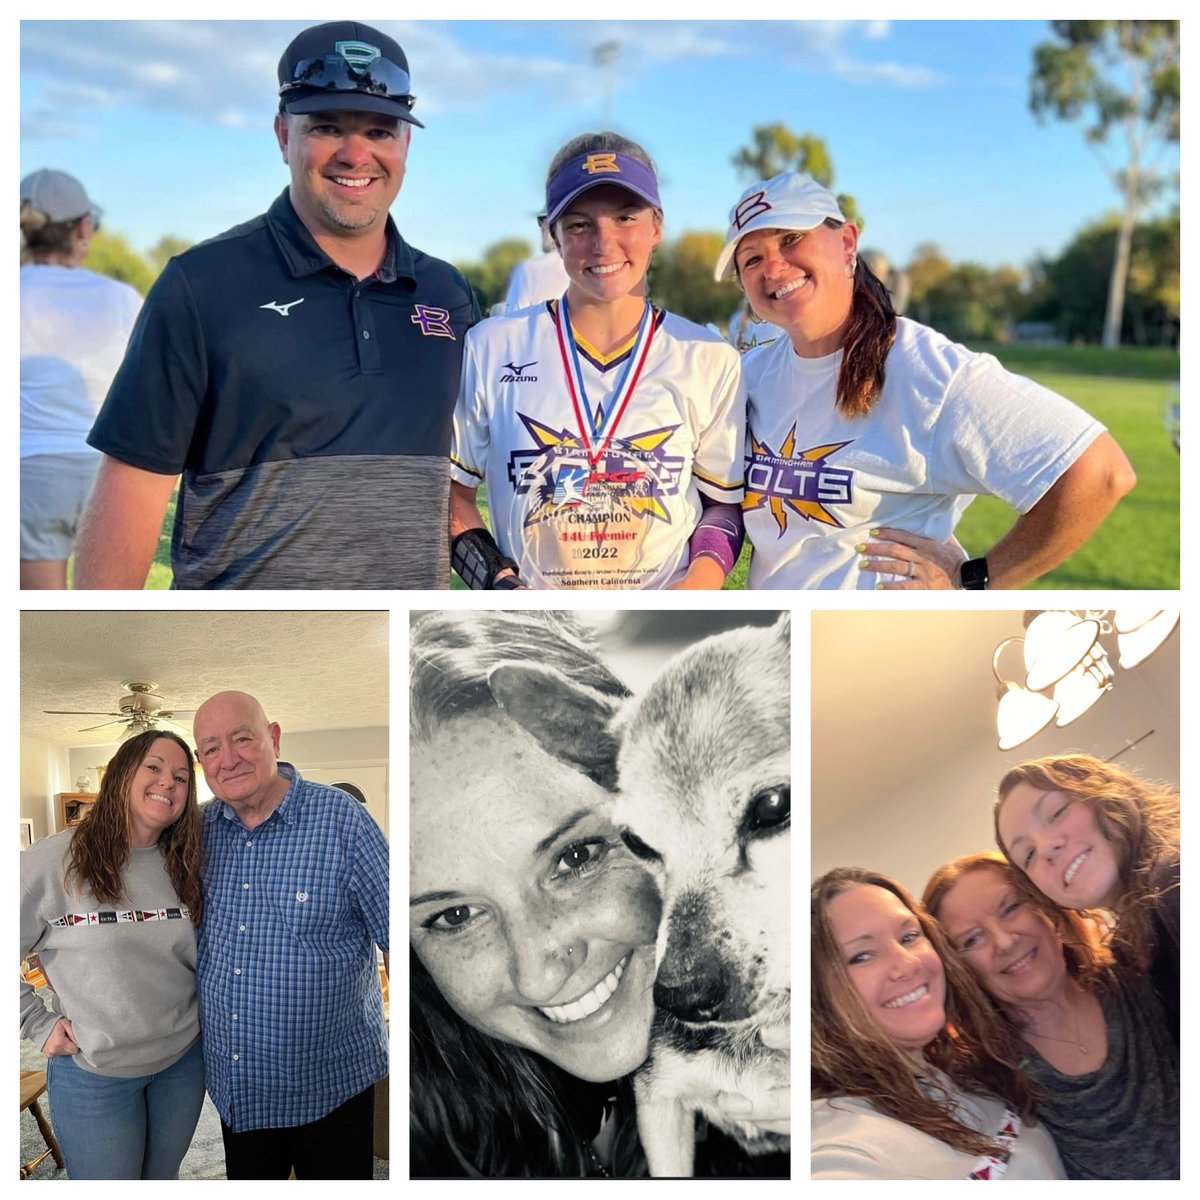 @crystalbyars33 
Birthday alert 🥳
Help me wish our beautiful daughter a very Happy Birthday 🎂🎉. We thank God for choosing us to be your parents. You make us so proud You are a GREAT daughter, spouse,sister, Mom and BFF ! Hope your day is as special as you are! We love you💜